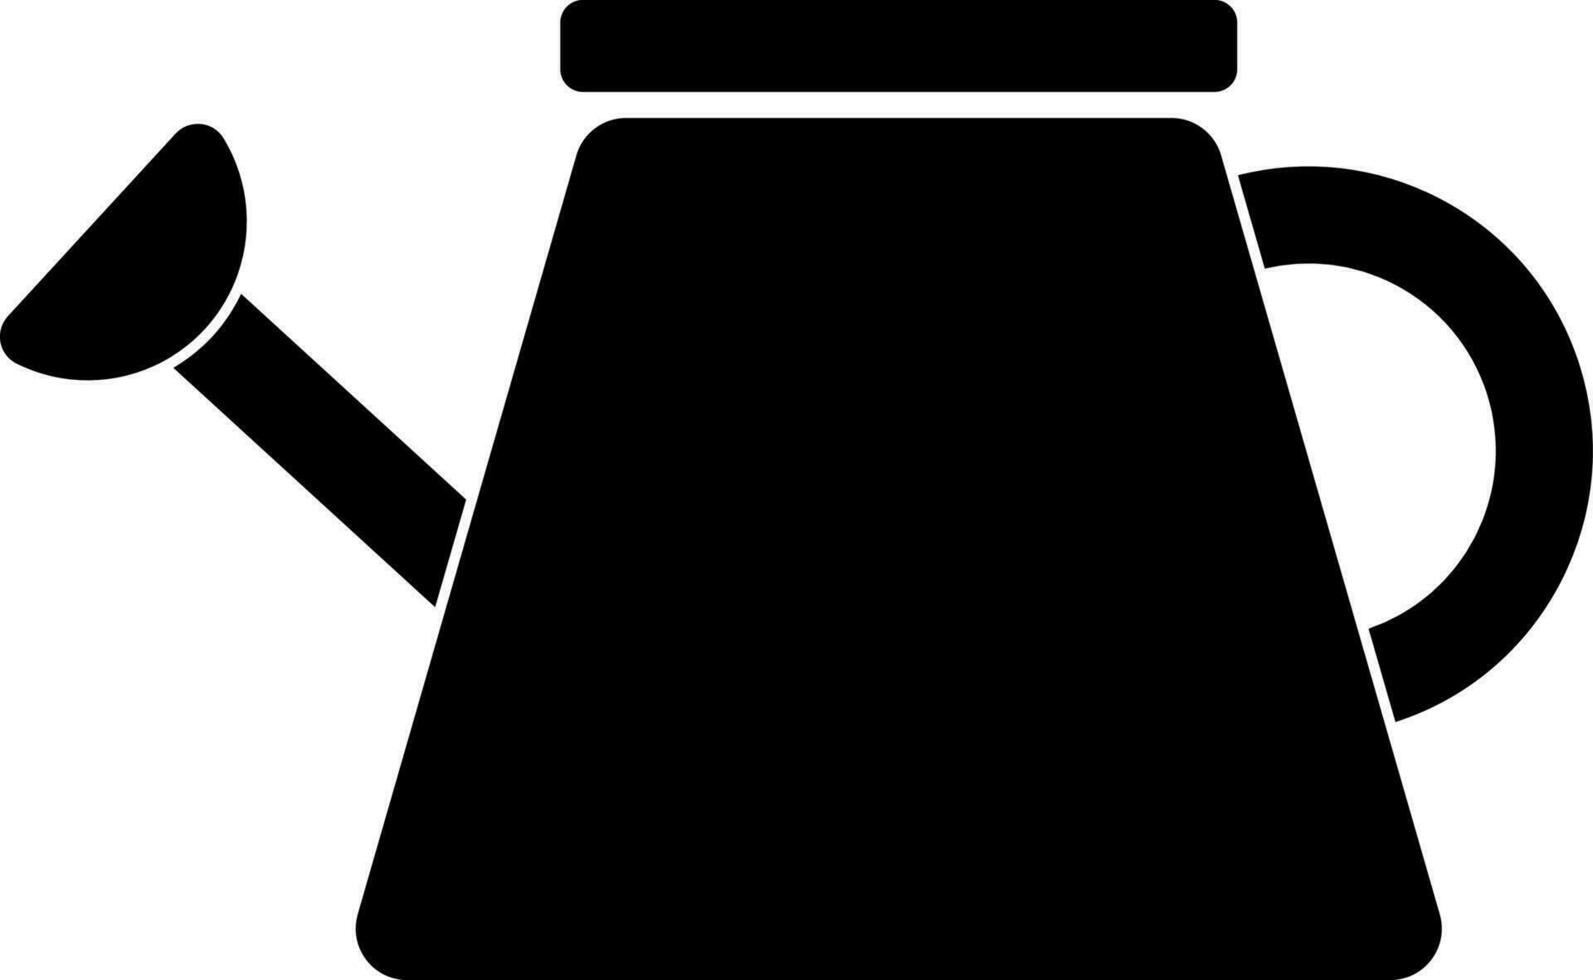 Isolated Black and White icon of Watering can. vector